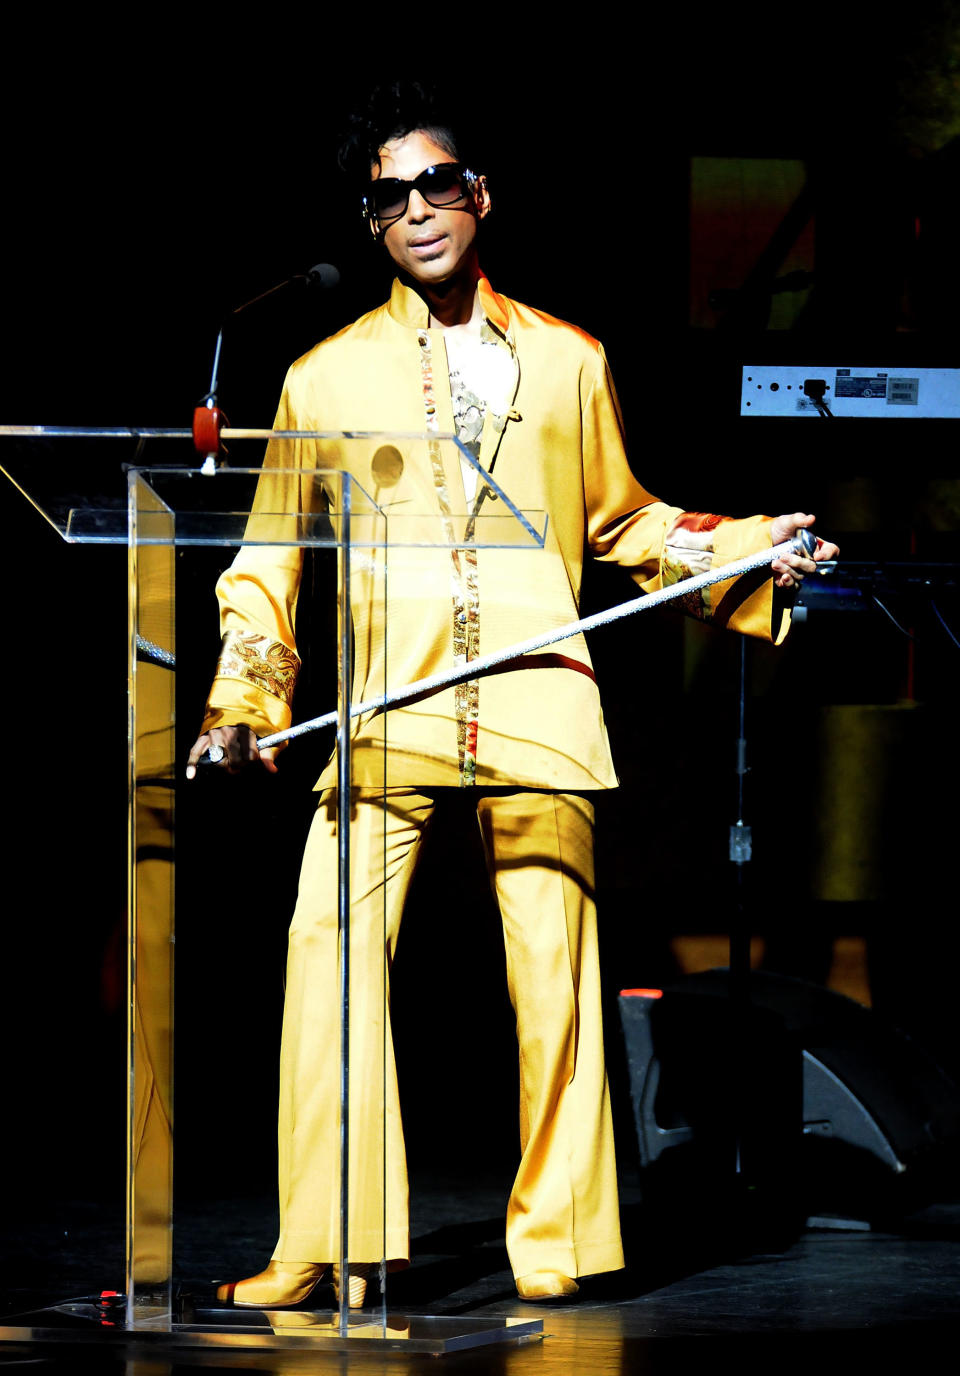 NEW YORK - JUNE 08:  Prince attends the Apollo Theater's 75th Anniversary Gala at The Apollo Theater on June 8, 2009 in New York City.  (Photo by George Napolitano/FilmMagic)